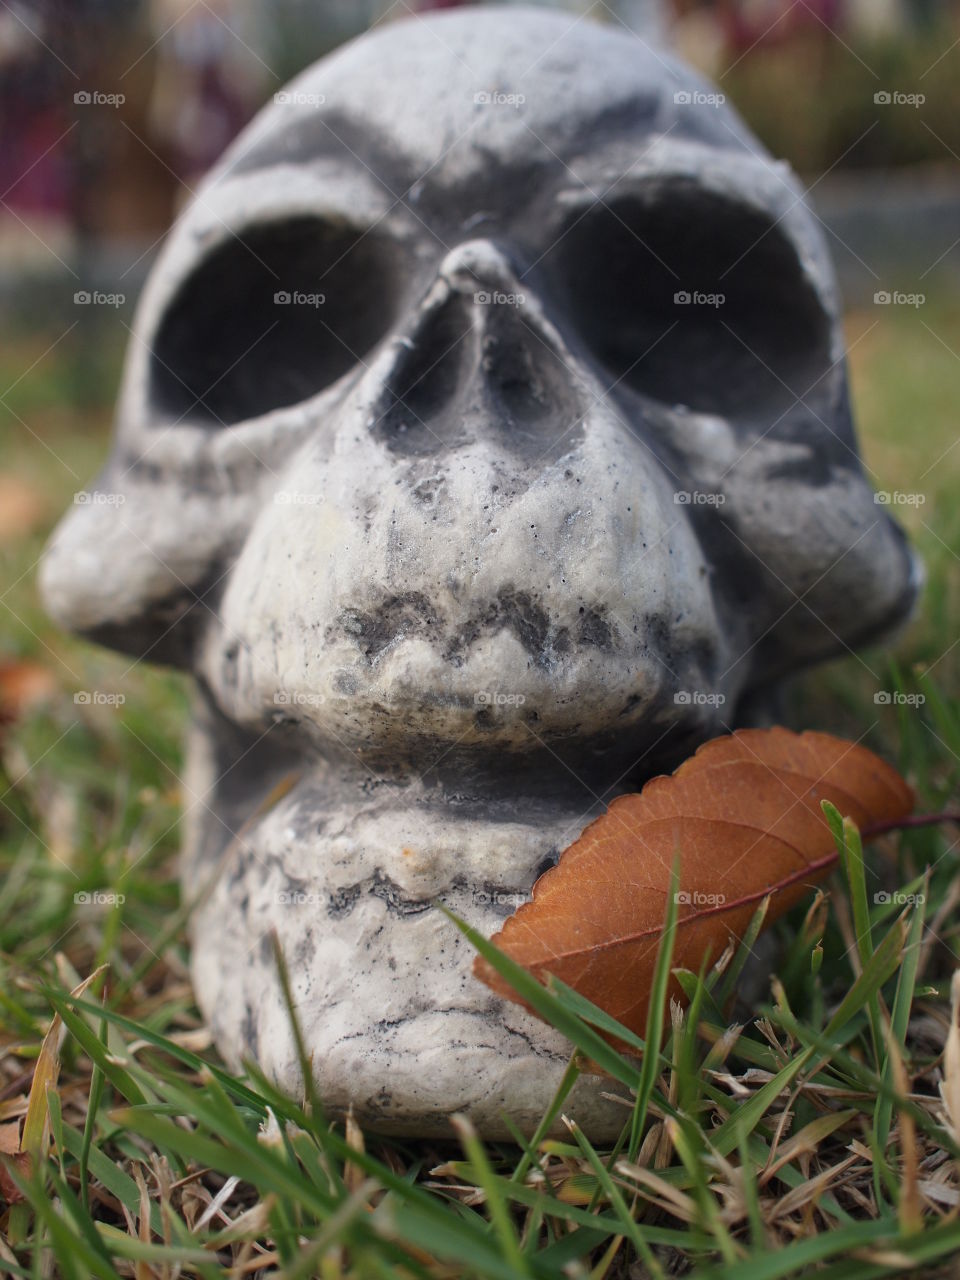 A scary looking Halloween decoration of a skull with a dead leaf blown against it sitting in the grass on a fall day. 
